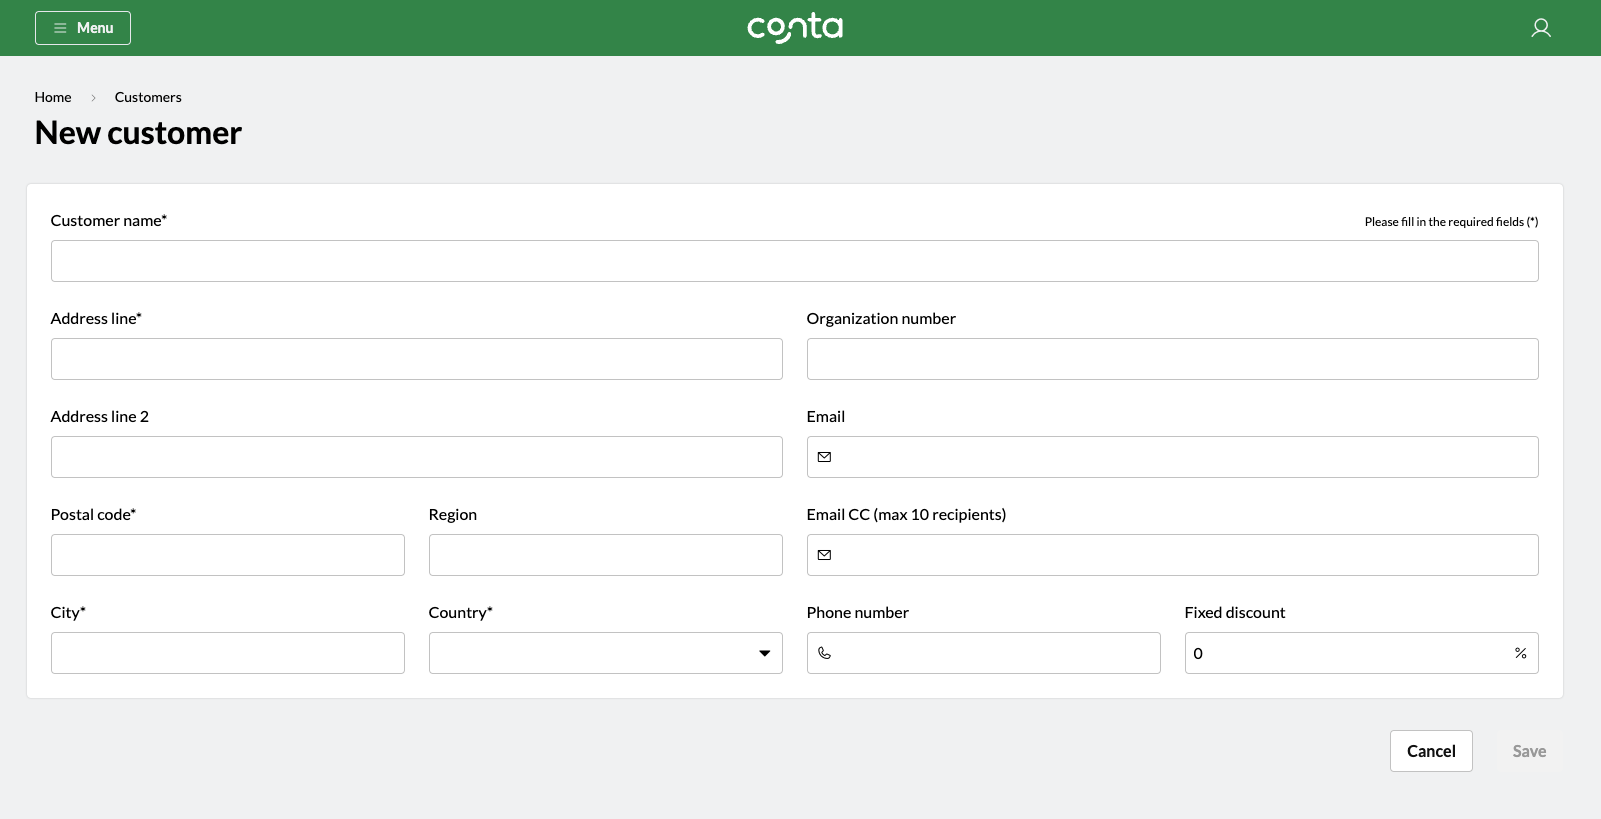 The new-customer page in Conta, where you can add customer information and save it to Conta